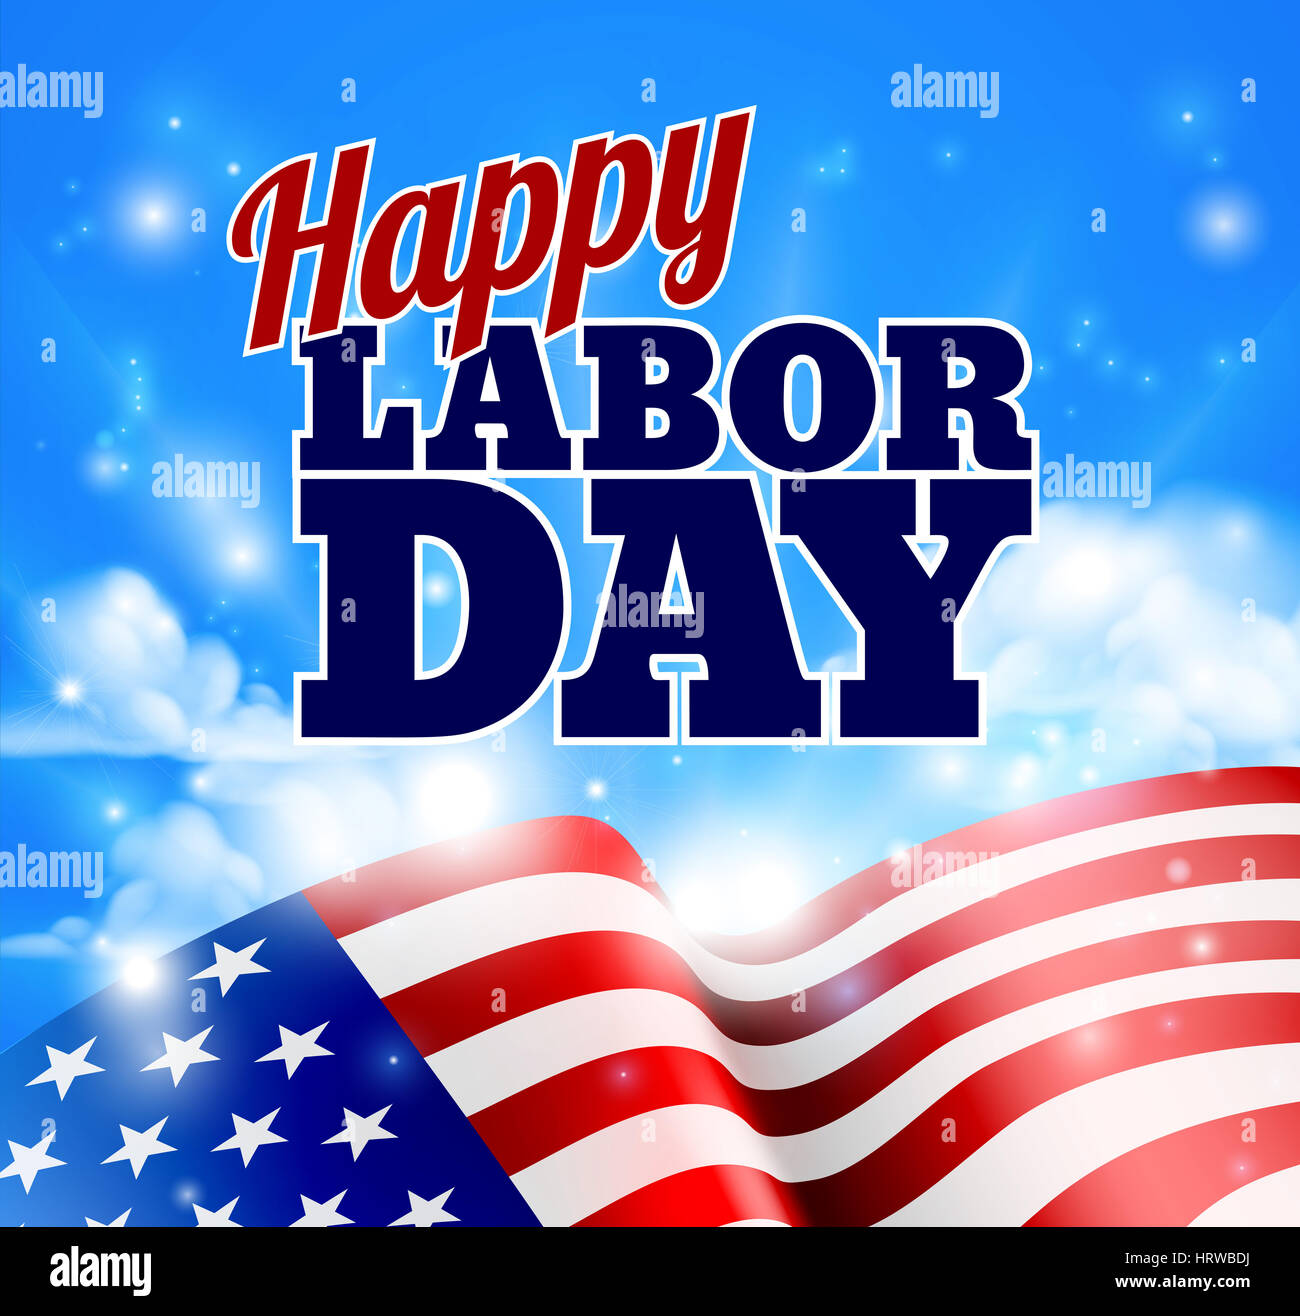 A Happy Labor Day design with an American flag and sky in the background Stock Photo